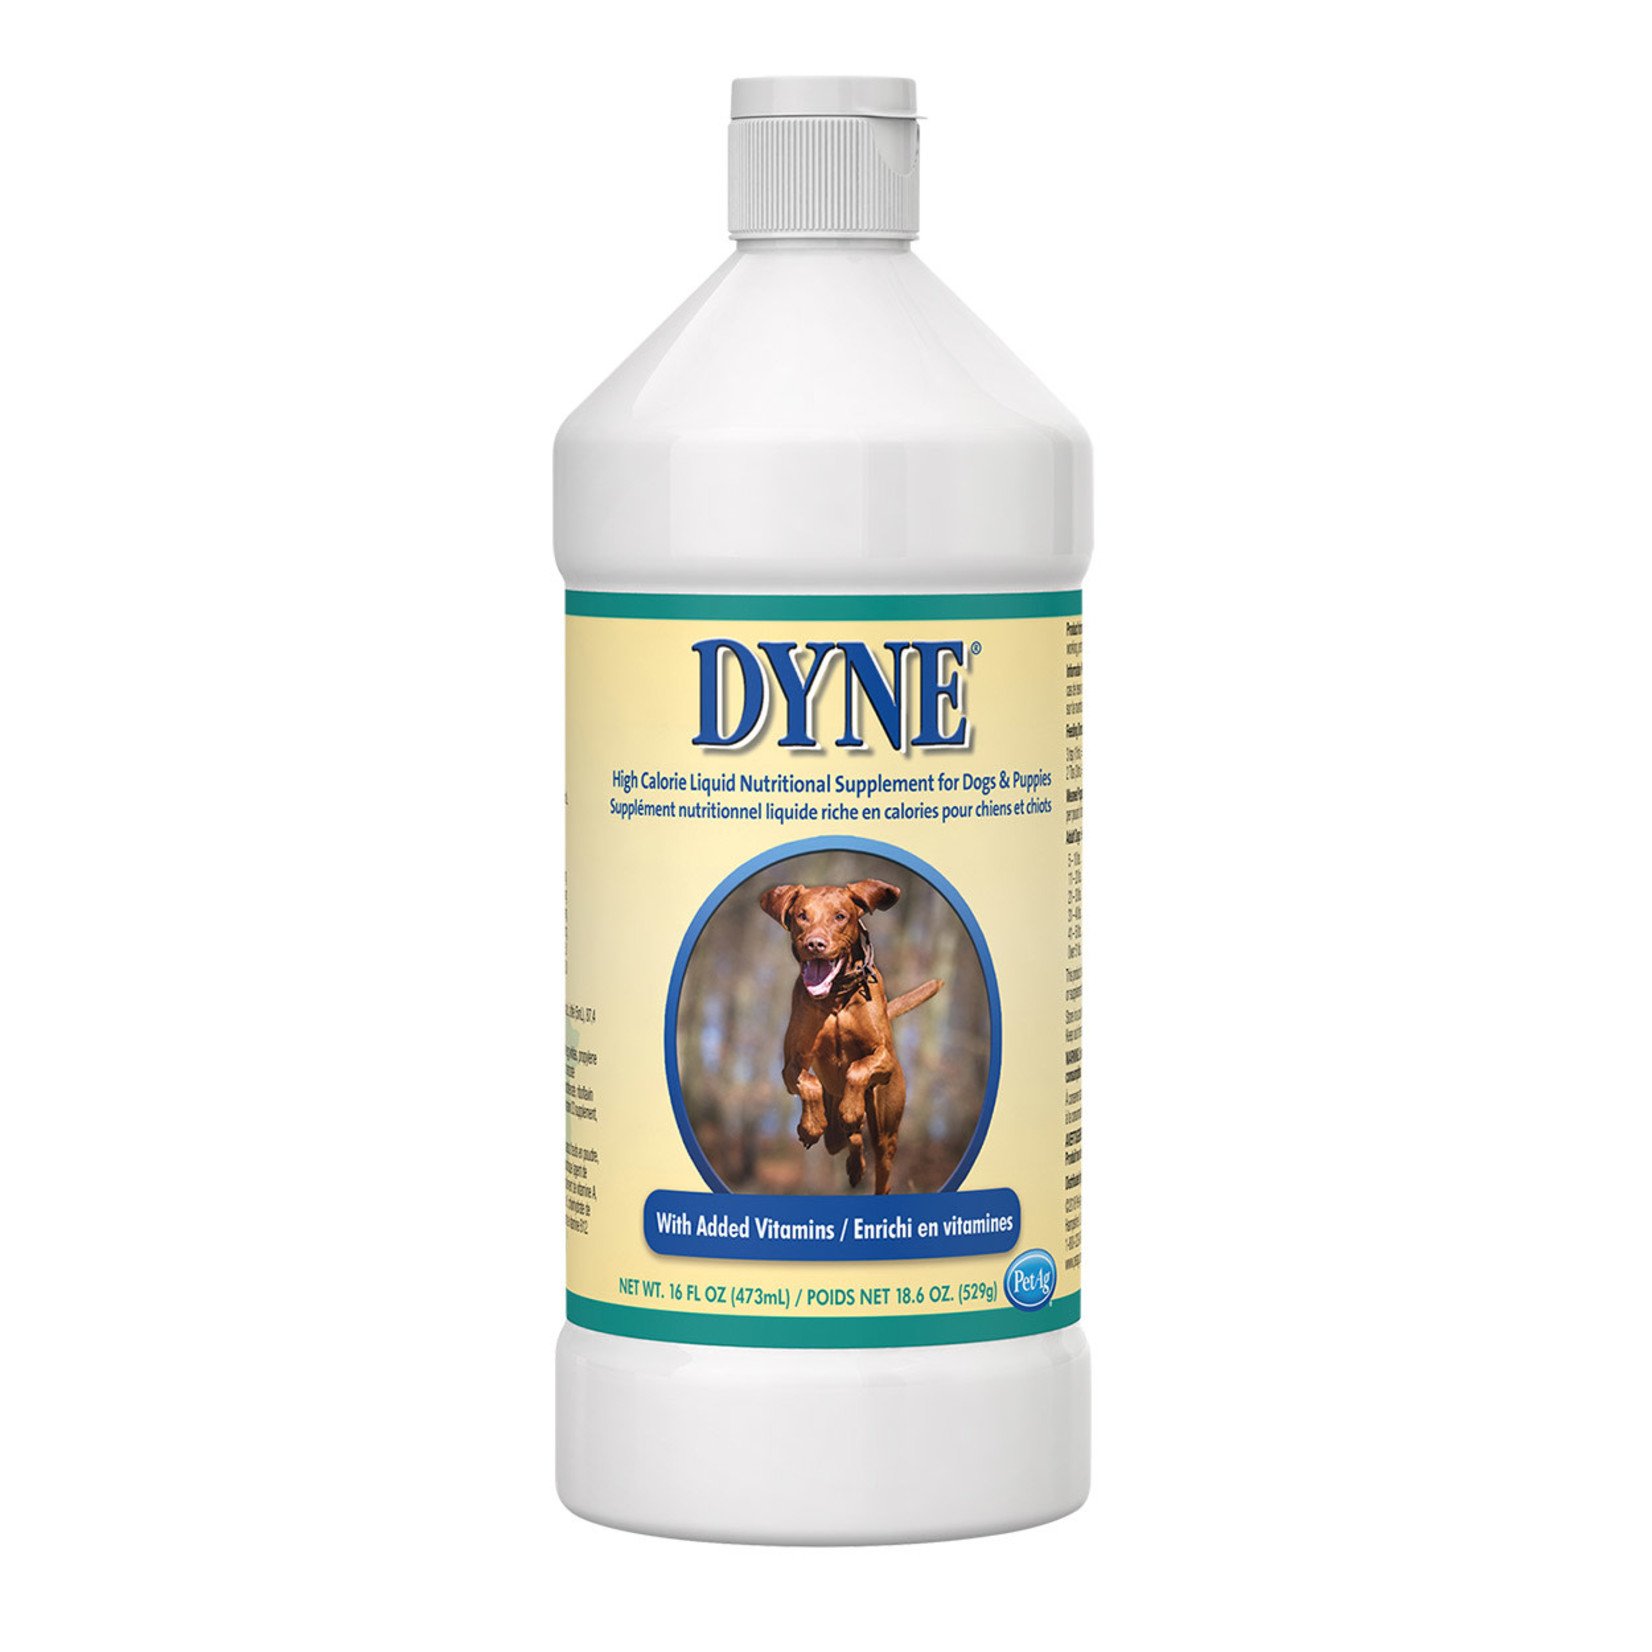 PETAG Dyne High Calorie Liquid Nutritional Supplement for Dogs & Puppies - 16 oz